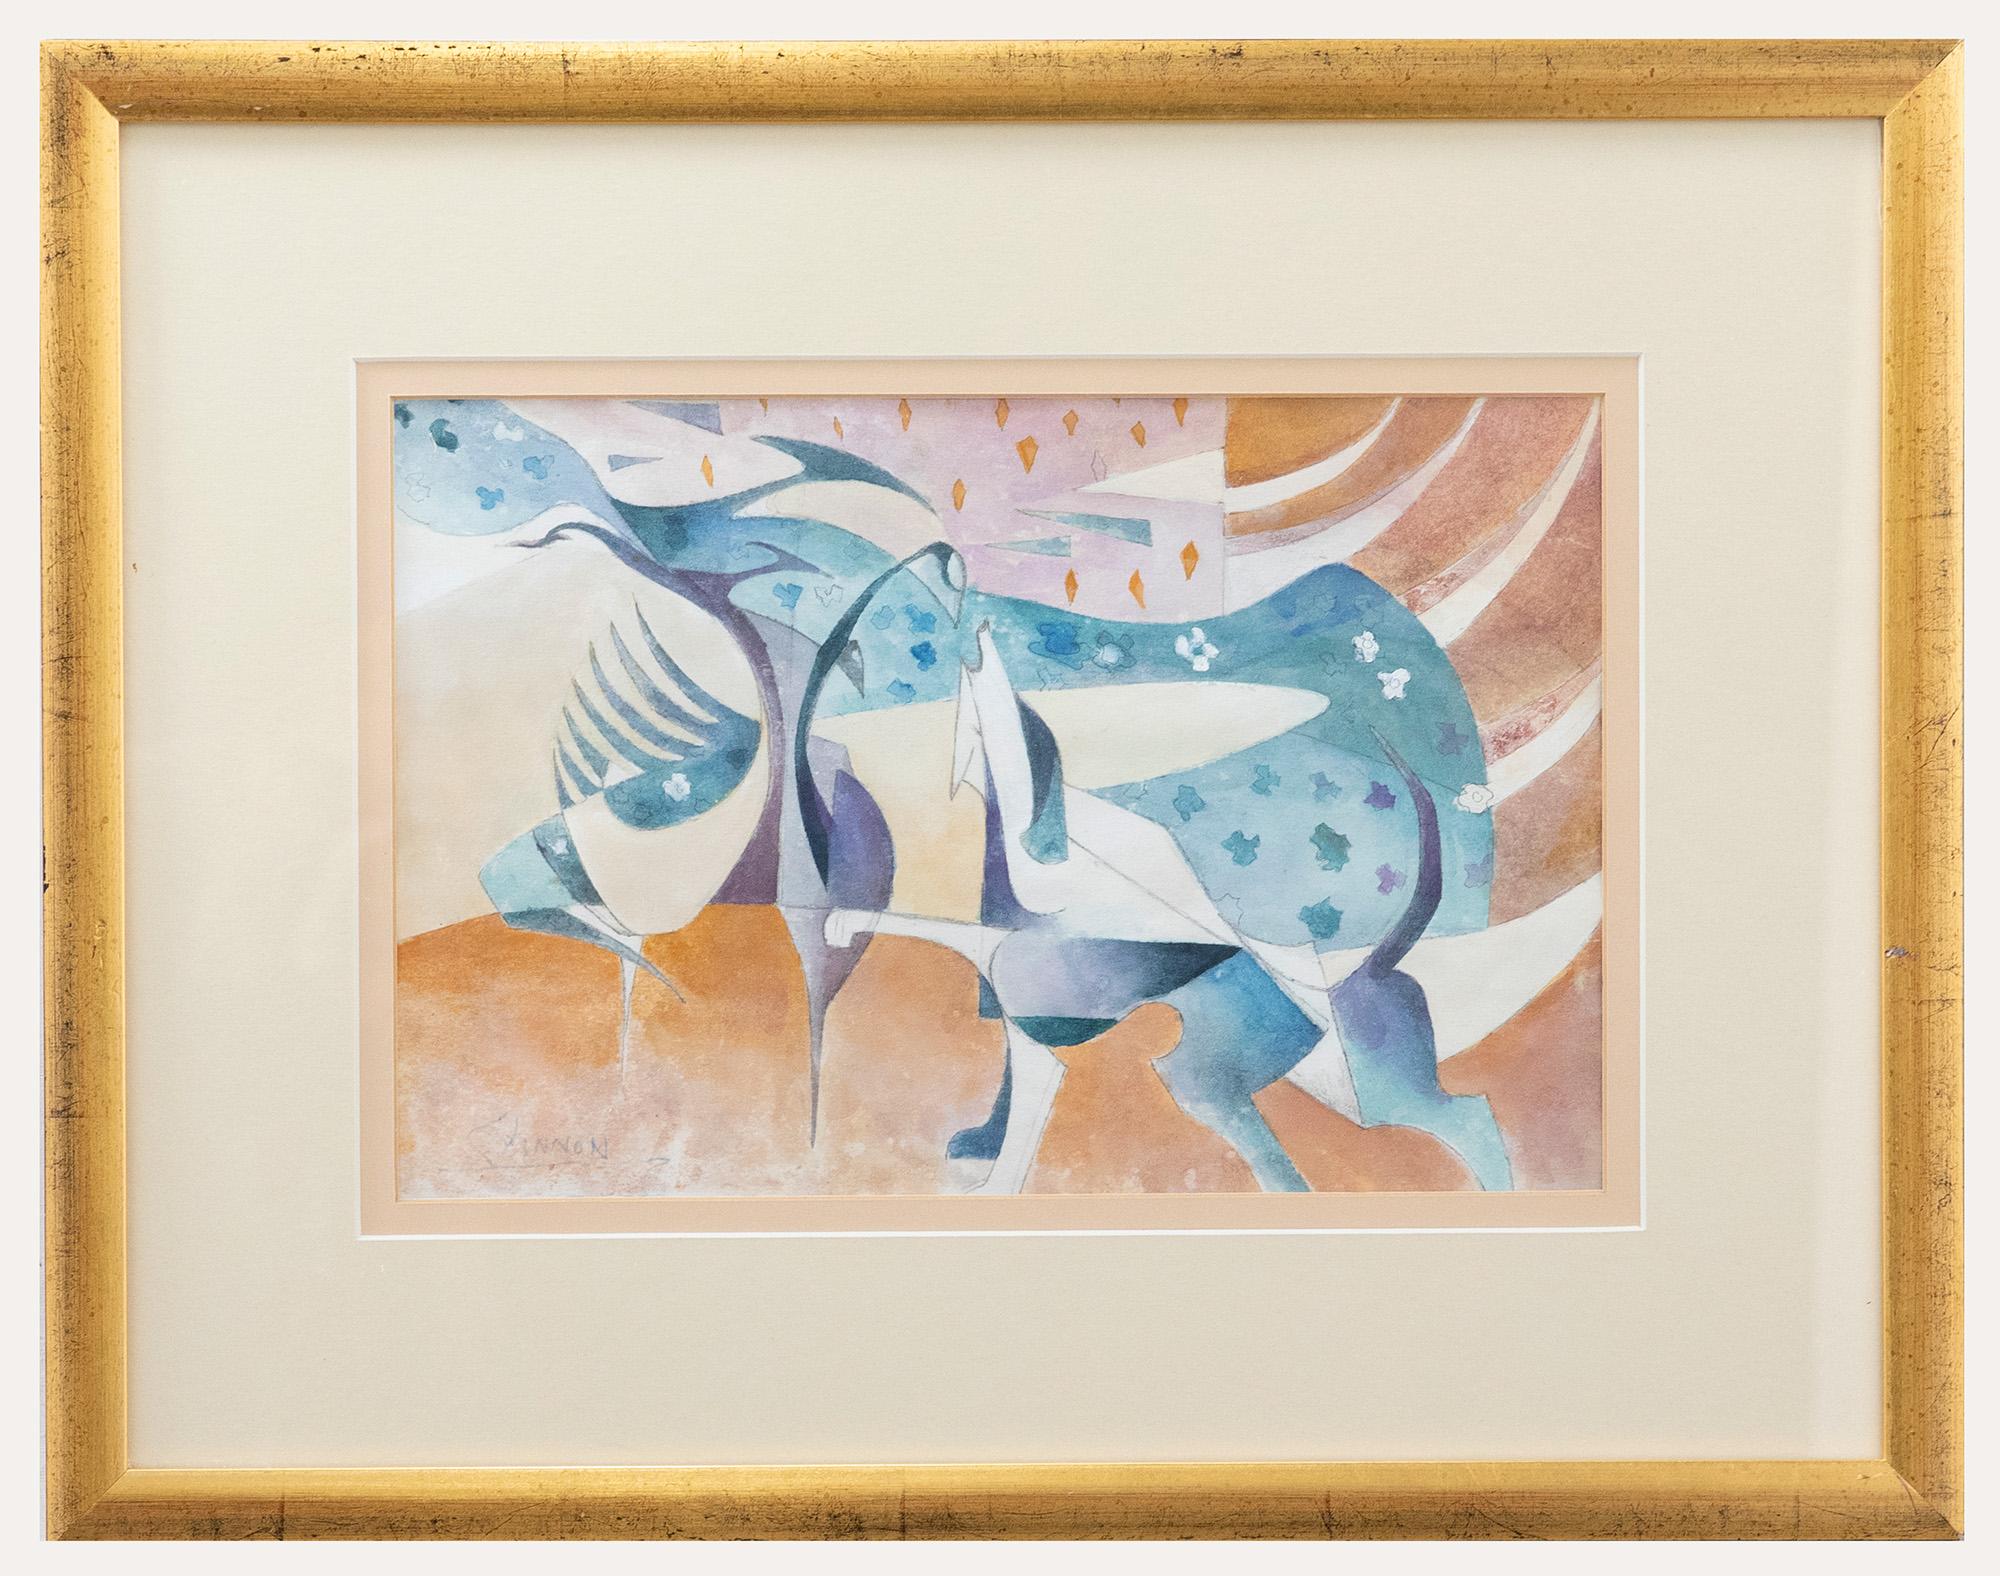 Unknown Animal Art - George Cannon (b.1930) - 20th Century Watercolour, Hound Dog and Frightened Bird